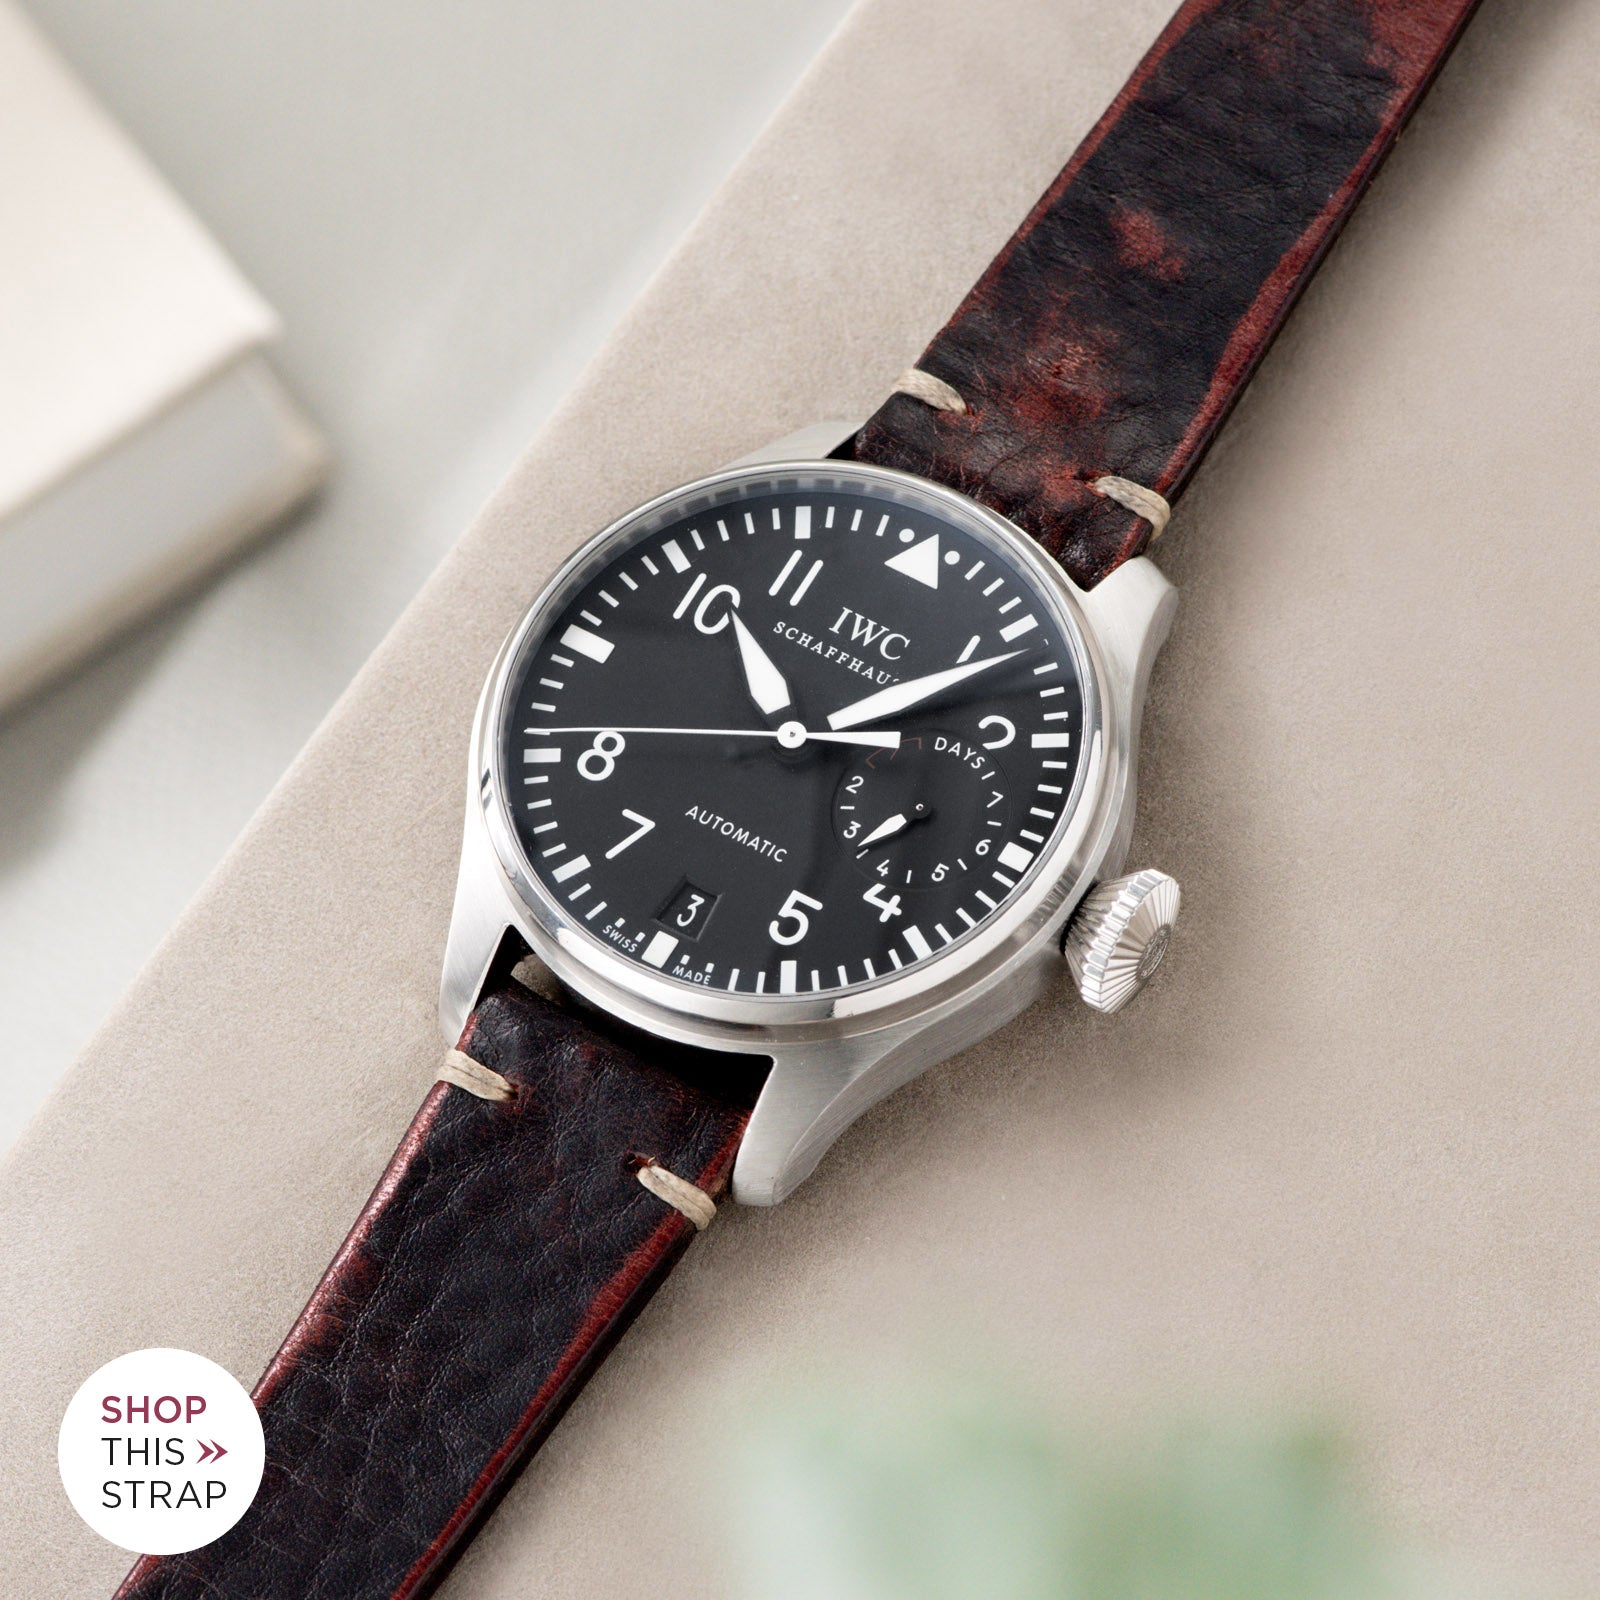 Bulang and Sons_Strap Guide_IWC Big Pilot Ref 5004_Diablo Black Leather Watch Strap